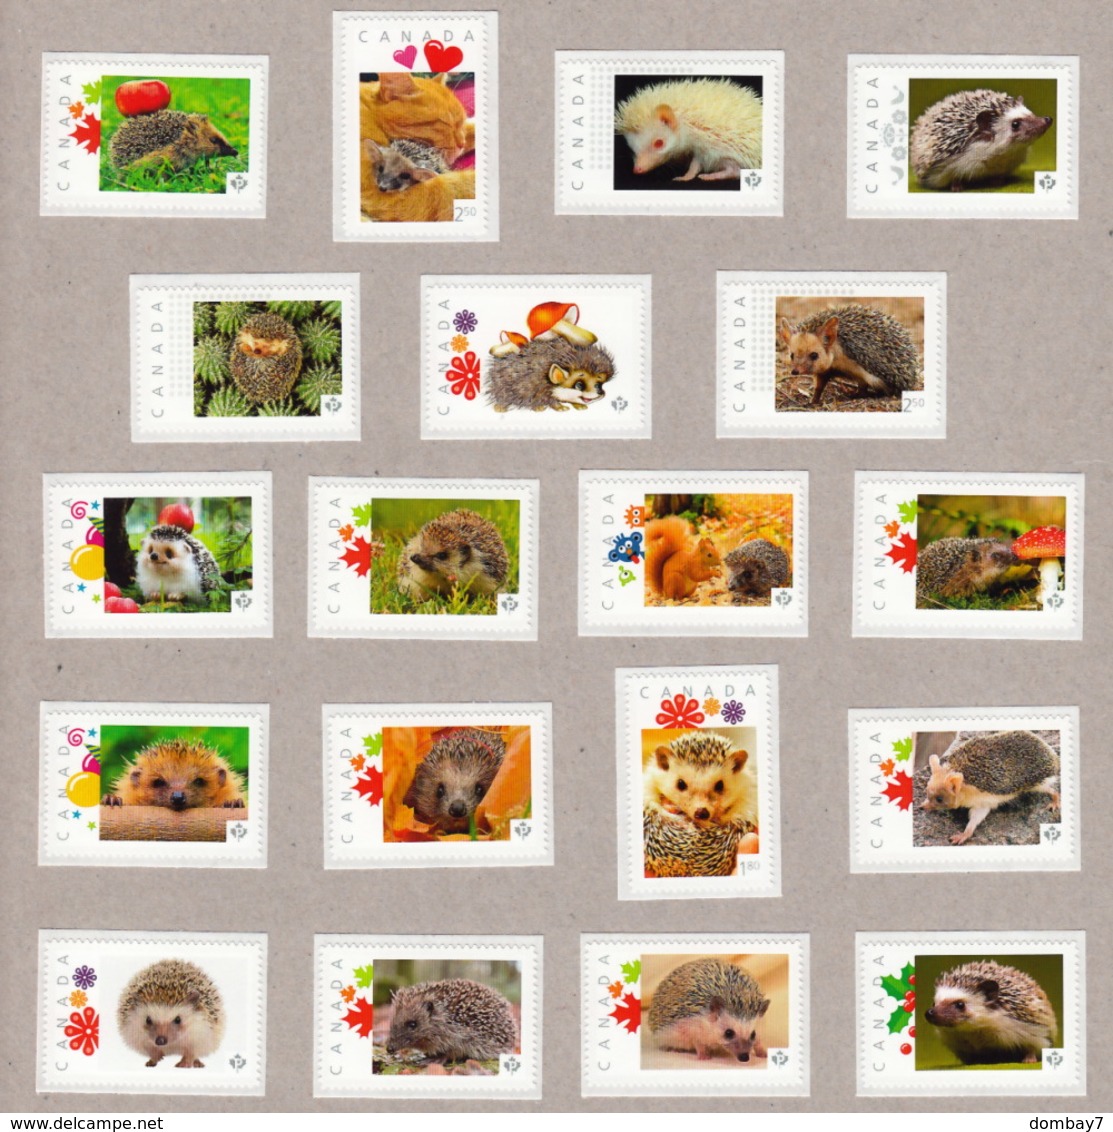 HEDGEHOG, ERIZO, RICCIO, IGEL, Hérisson MNH Stamps LIMITED! ONLY 2 Collection Available! ONLY HERE! Canada 2014-2015 - Rongeurs